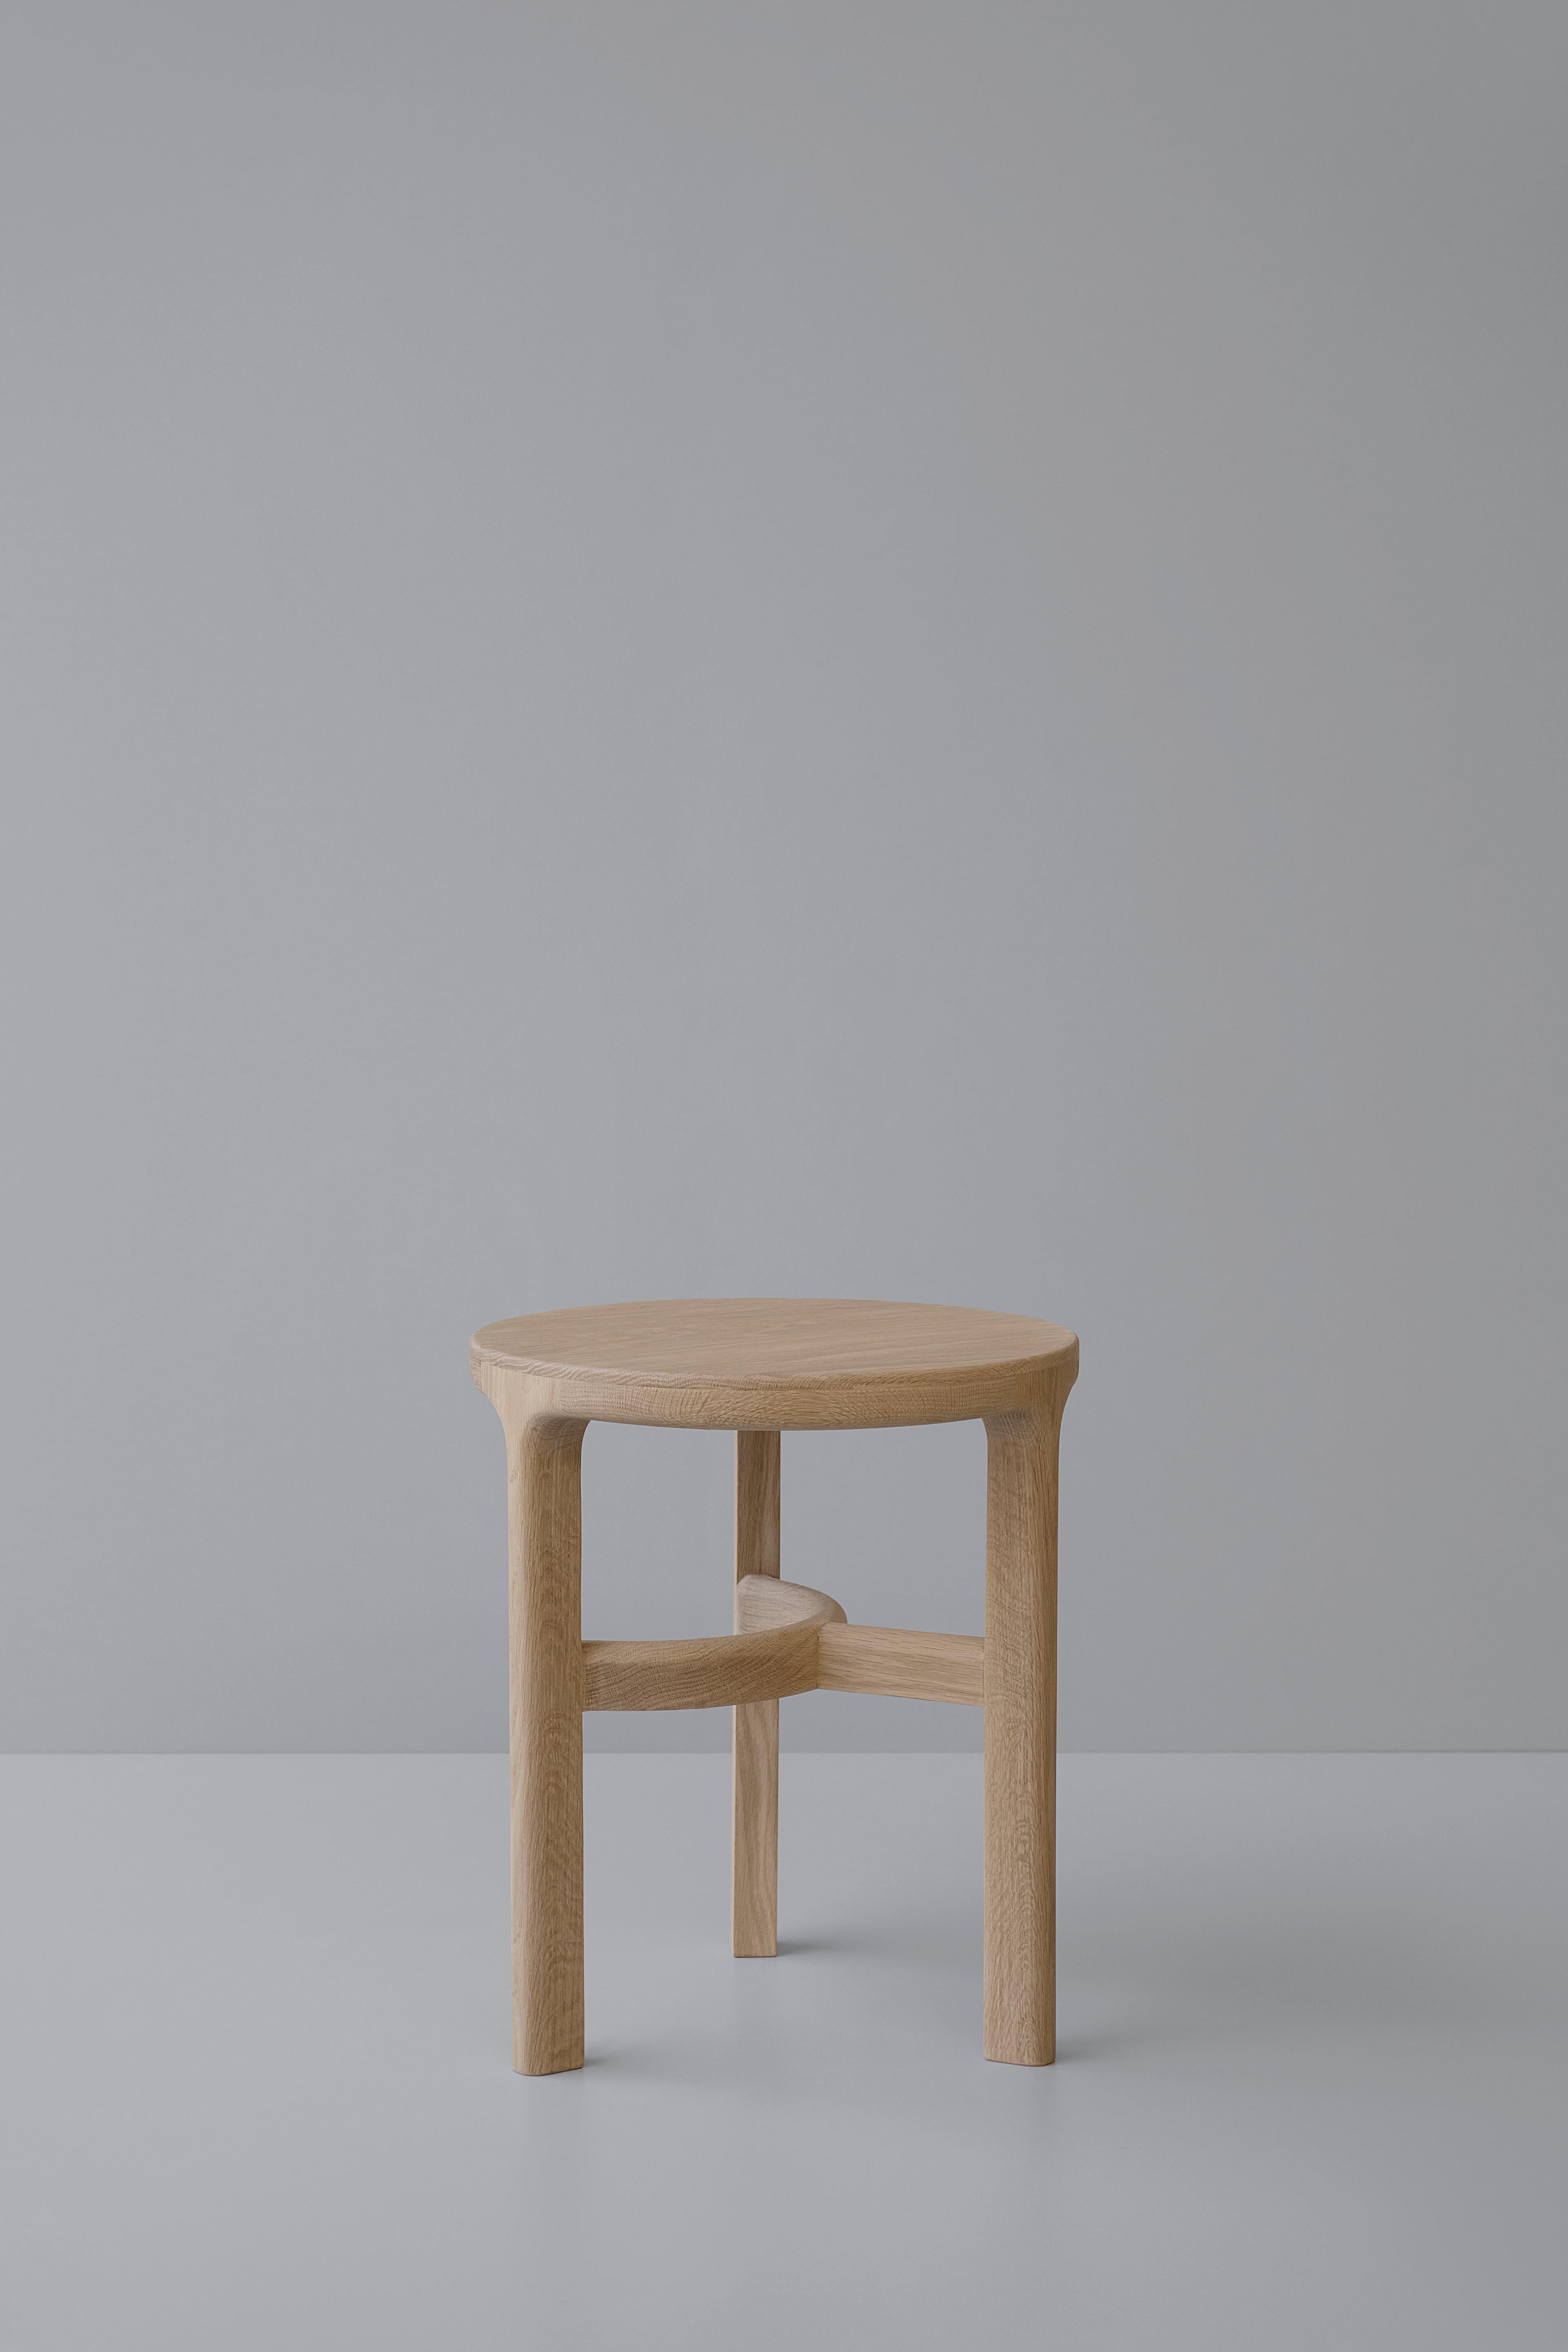 Trasiego side table by Arturo Verástegui
Dimensions: D 47 x W 47 x H 54 cm
Materials: oak wood.

Natural white oak side table.

Sebastián Angeles is an Industrial Designer originally from Mexico City who graduated from the Anáhuac Mexico University